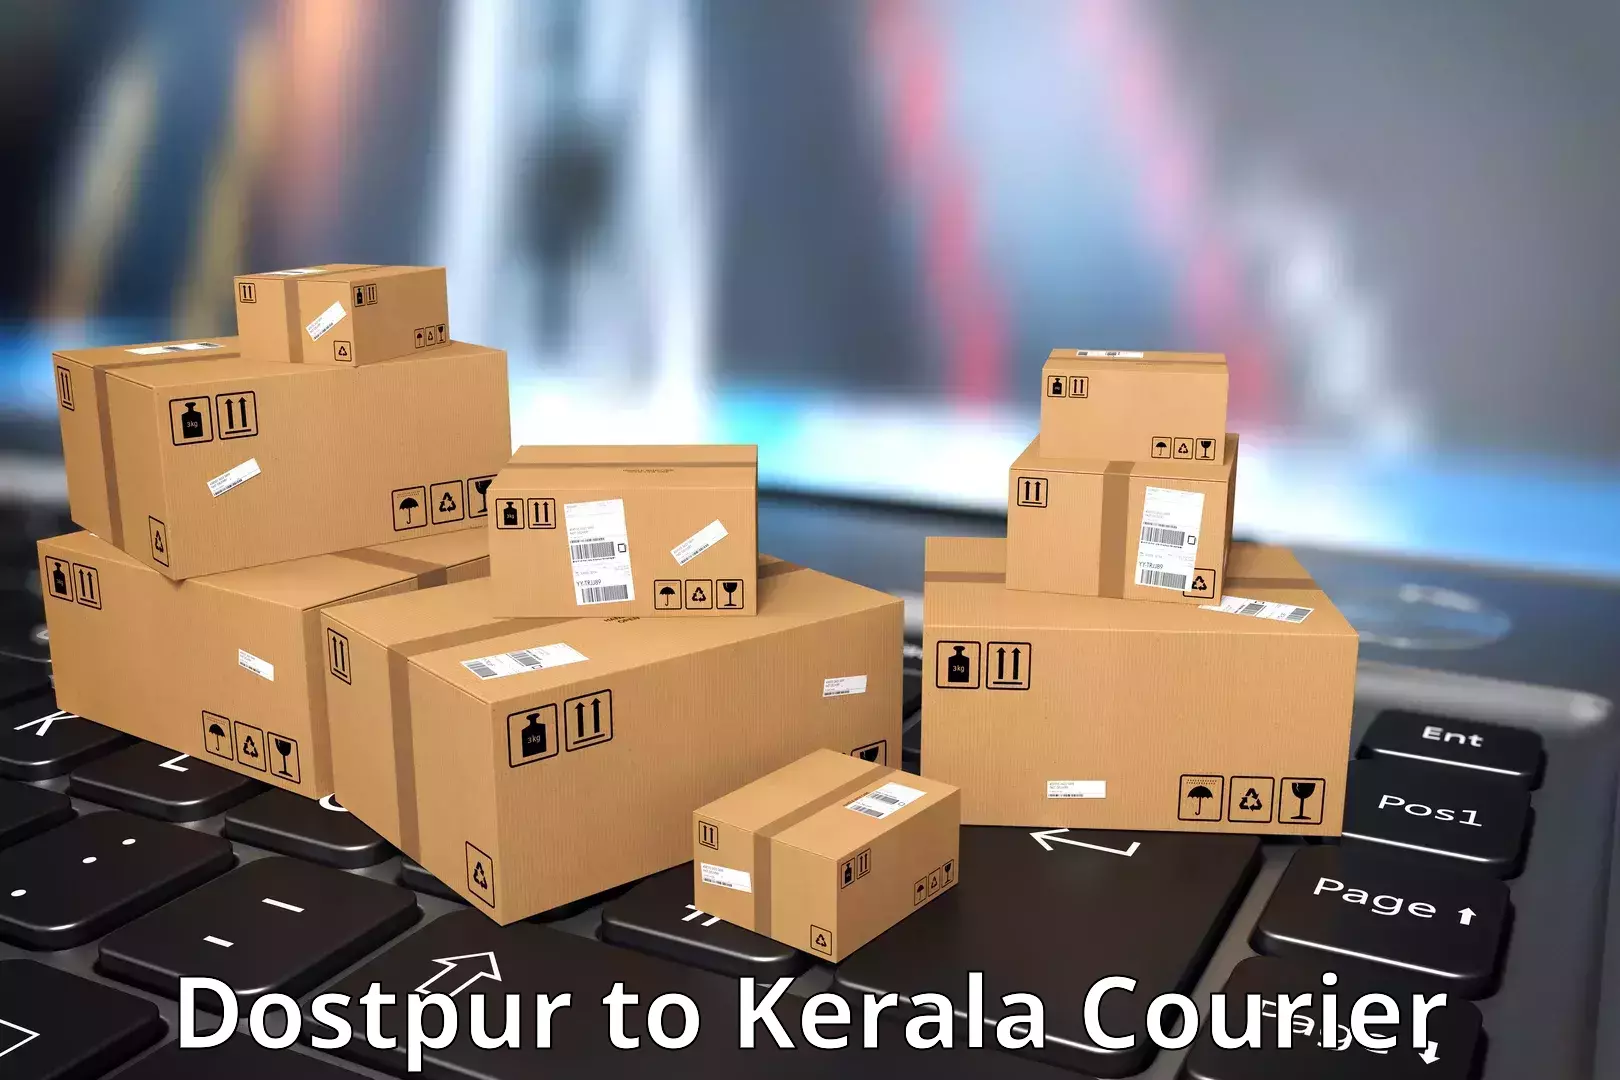 Nationwide courier service Dostpur to Balussery